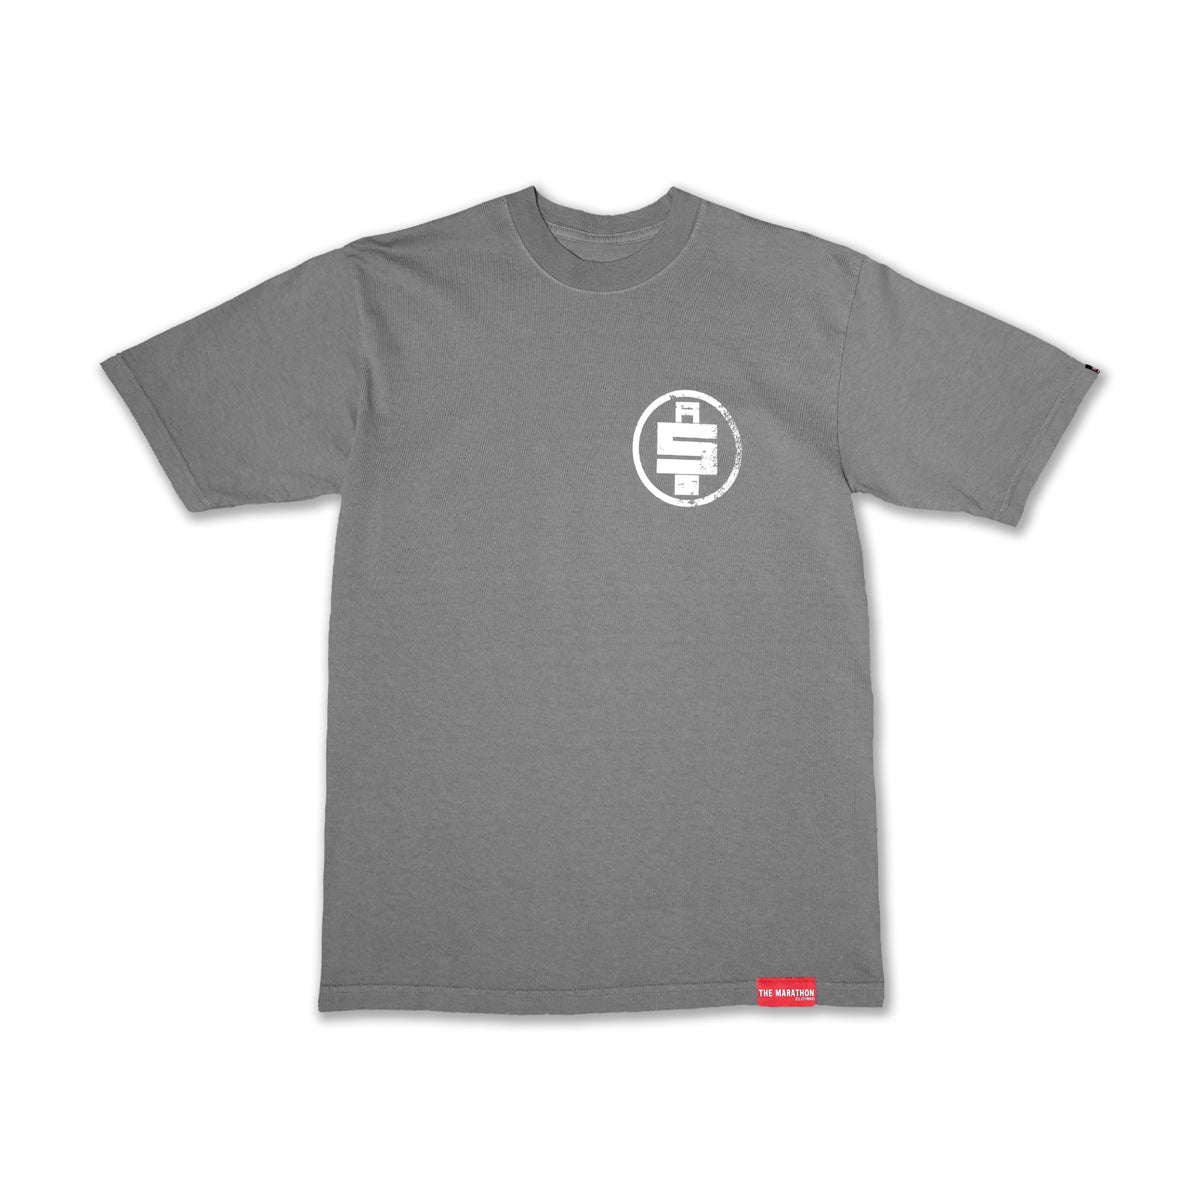 All Money In Vintage T-Shirt - Slate Grey/White - Front